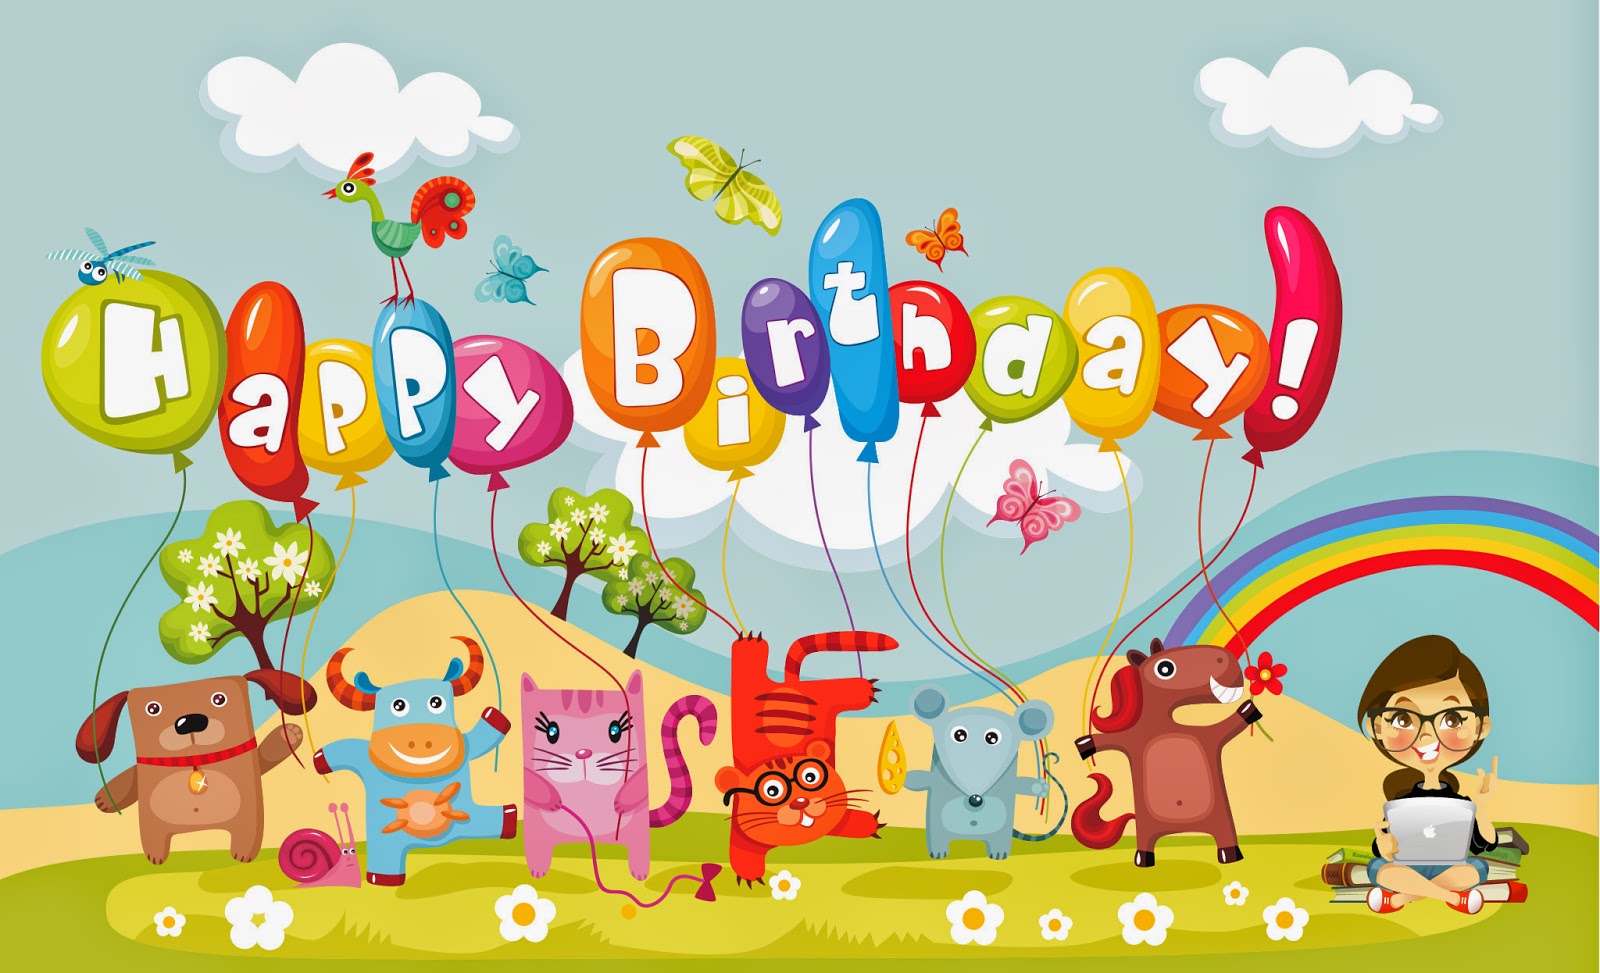 Happy-Birthday-Wishes-Free-Download-Wallpapers.jpg